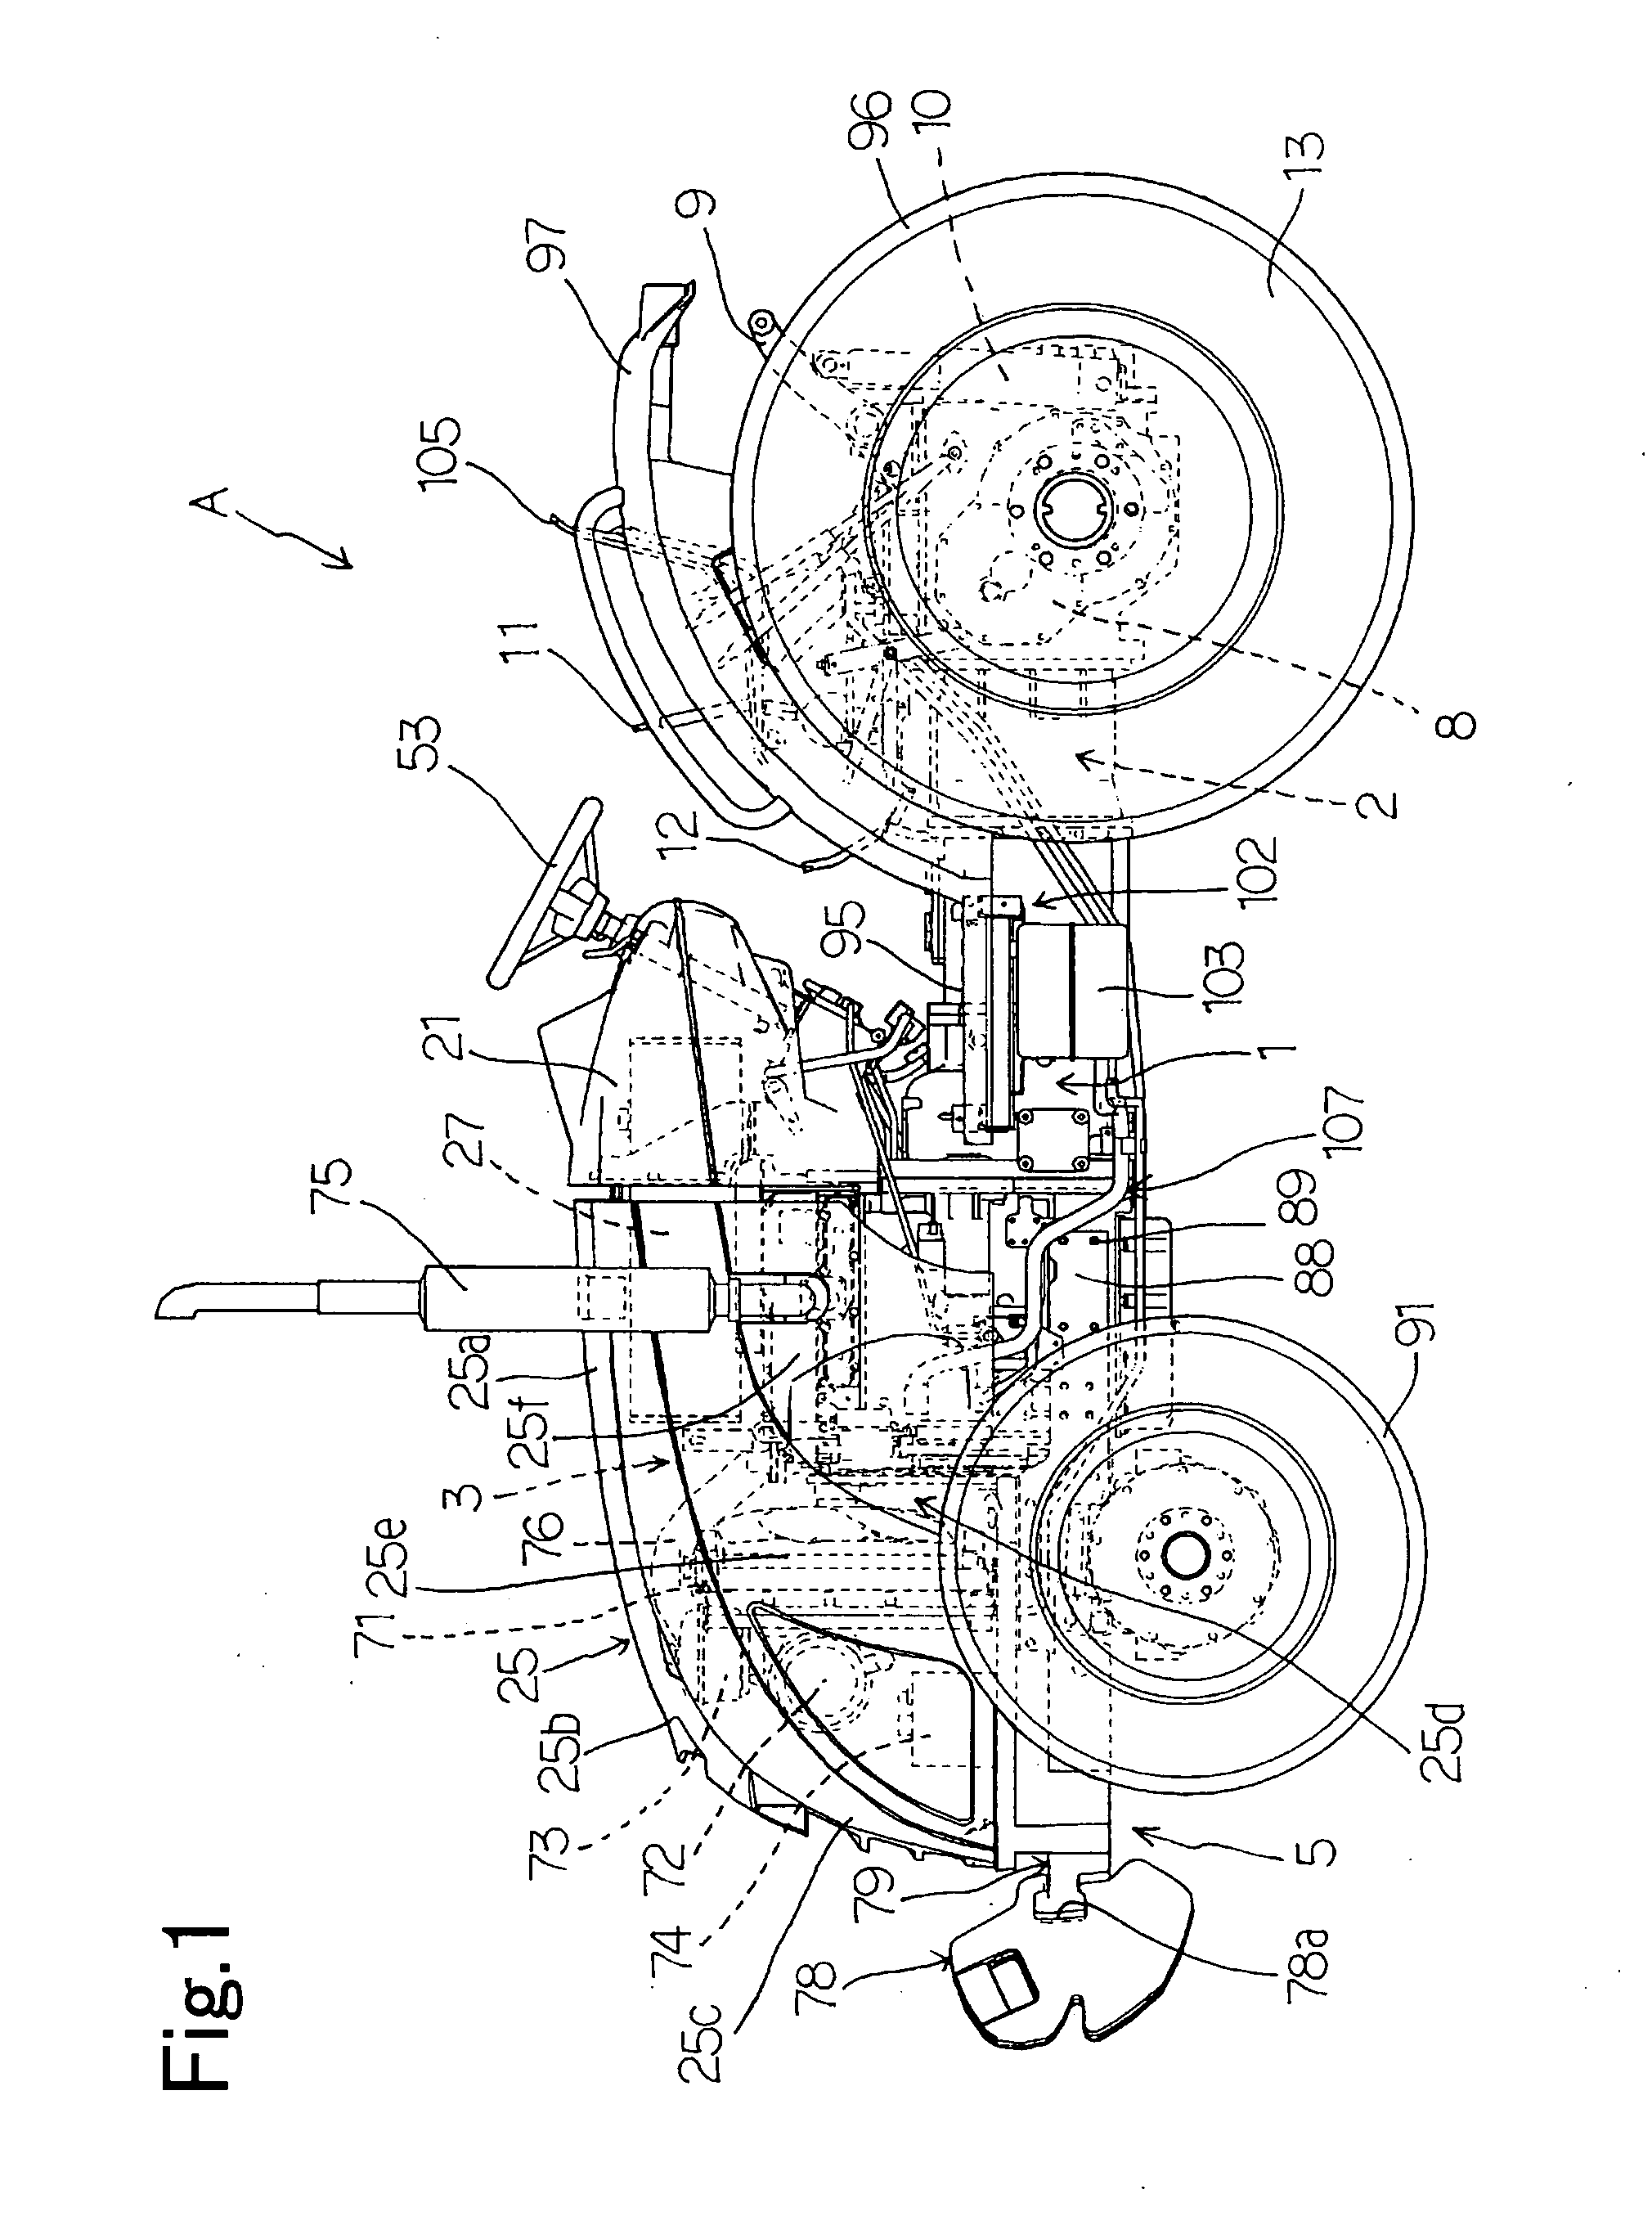 Assembling Method of Tractor and Tractor